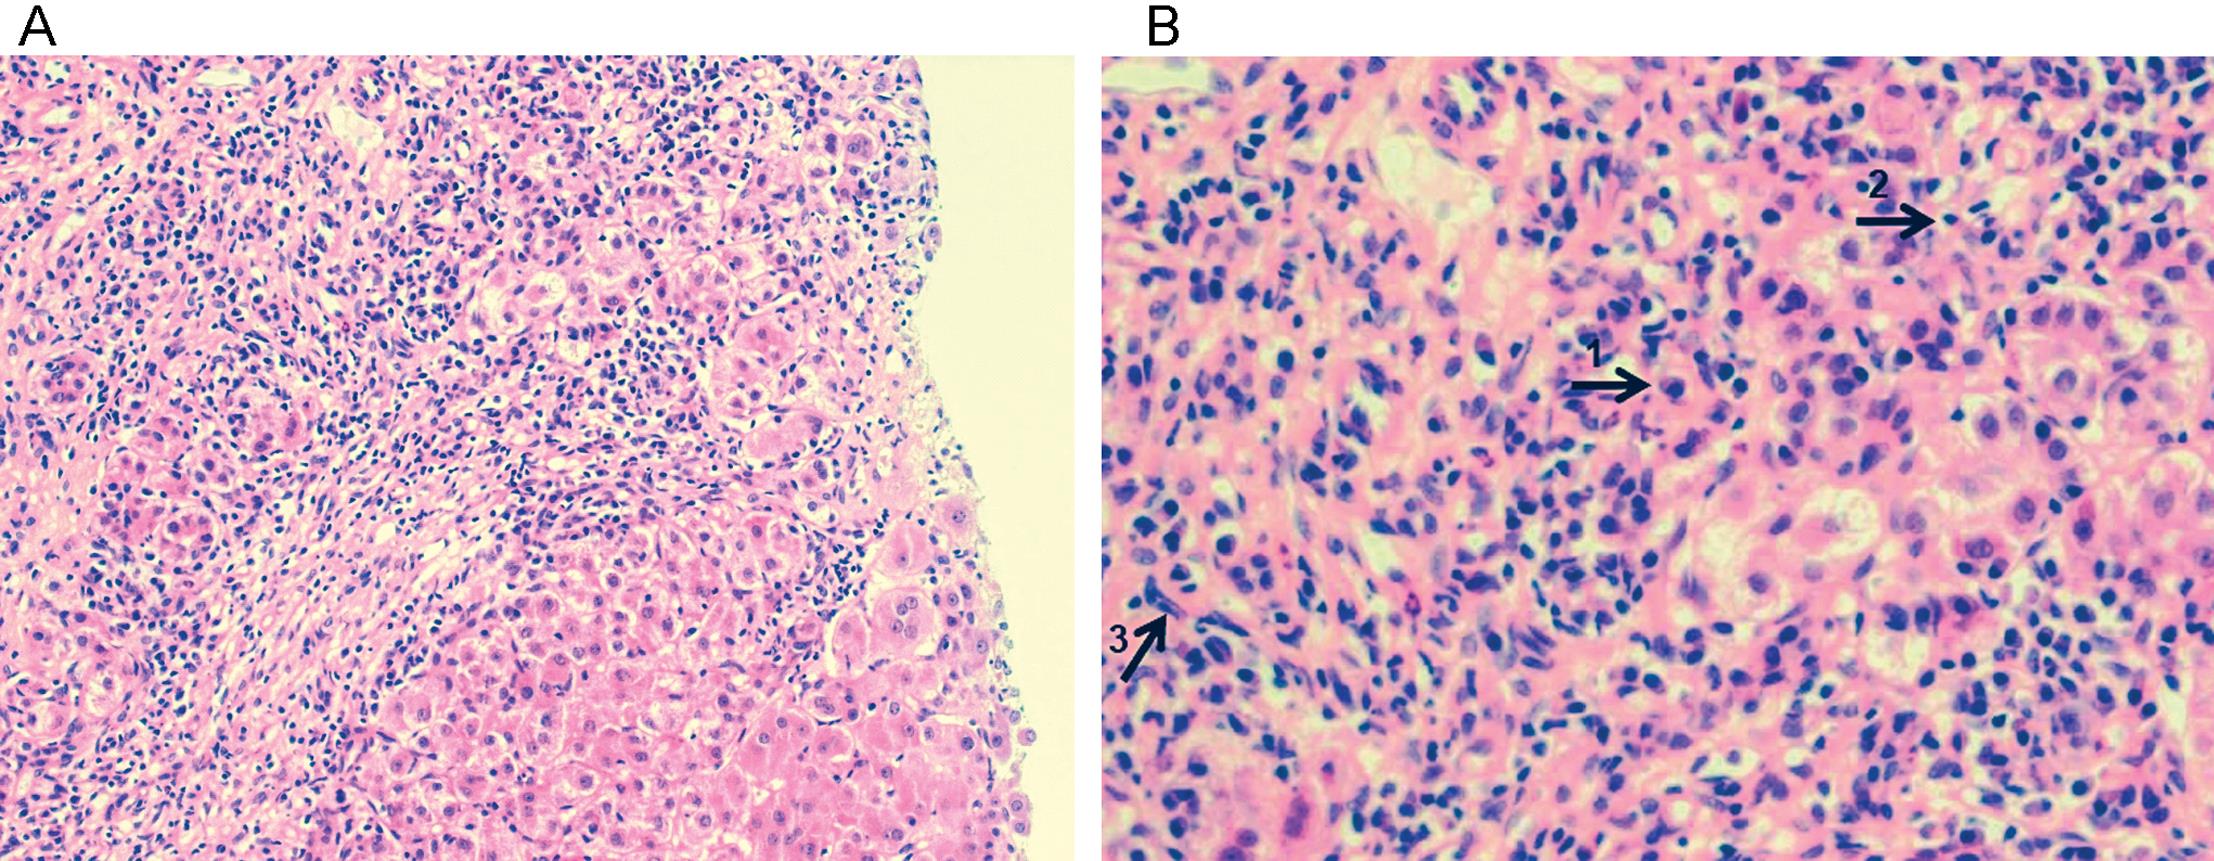 Histological picture of AIH. (A) Portal and peri-portal inflammatory infiltrate, characteristic of autoimmune hepatitis, consists of (B) plasma cells, lymphocytes and monocytes/macrophages, as phenotypically indicated by arrows labeled 1, 2, and 3, respectively. There is evidence of interface hepatitis and piecemeal necrosis of hepatocytes. Hematoxylin and eosin staining, magnification ×200 (A) and x400 (B). (Credit: Dr Alberto Quaglia)